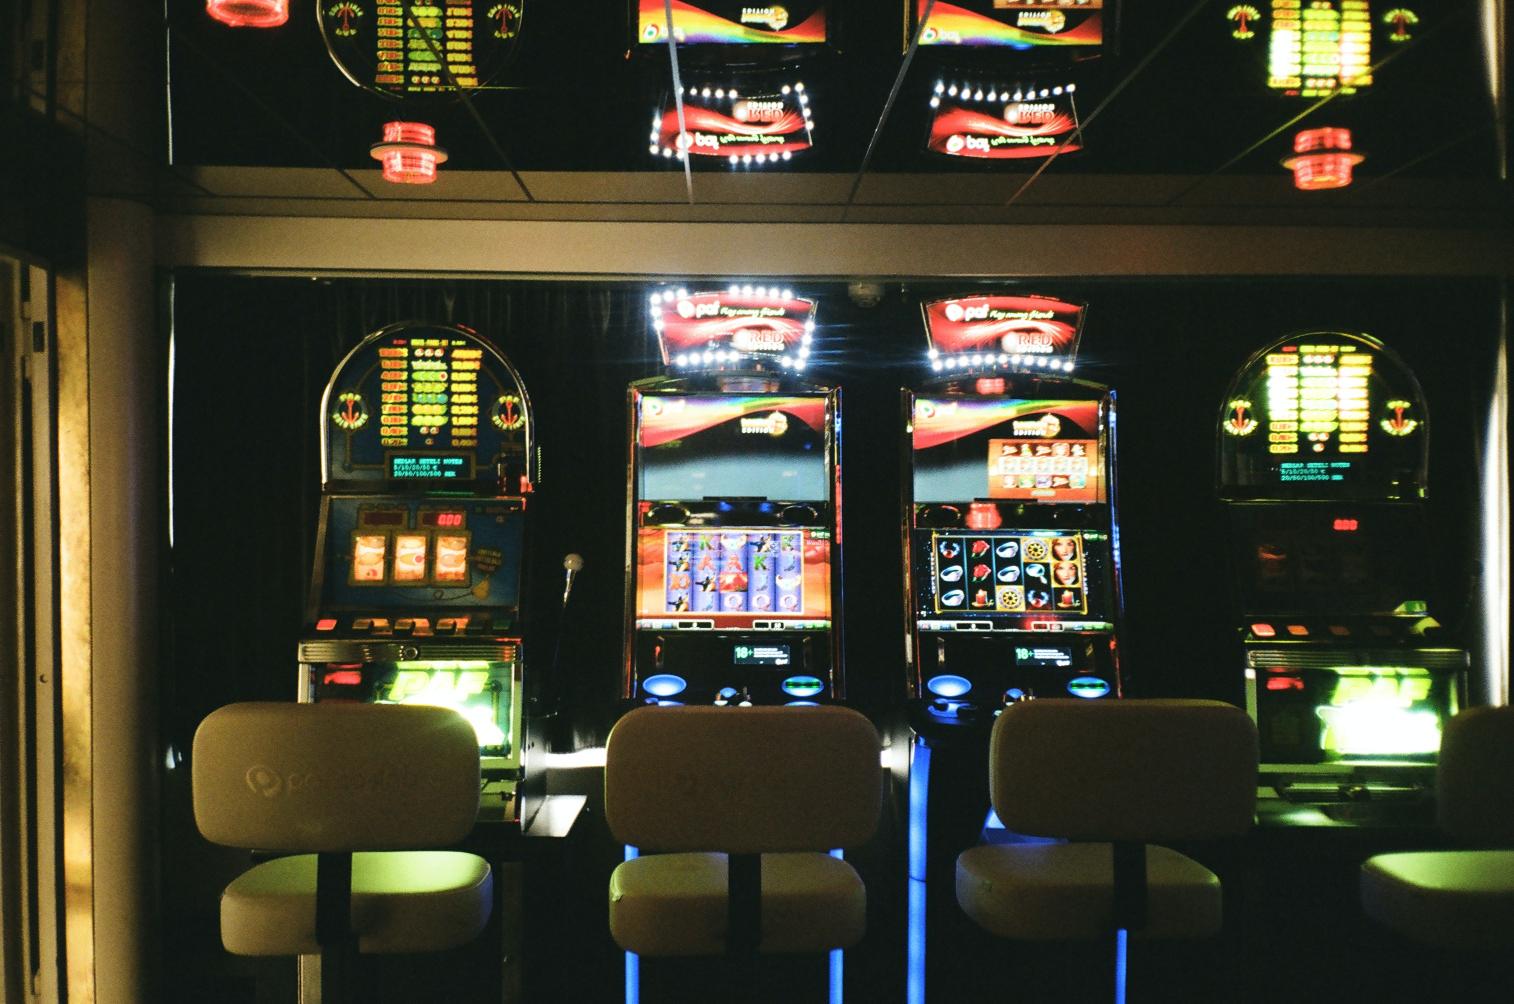 What are the top 10 biggest myths about casinos and gambling?